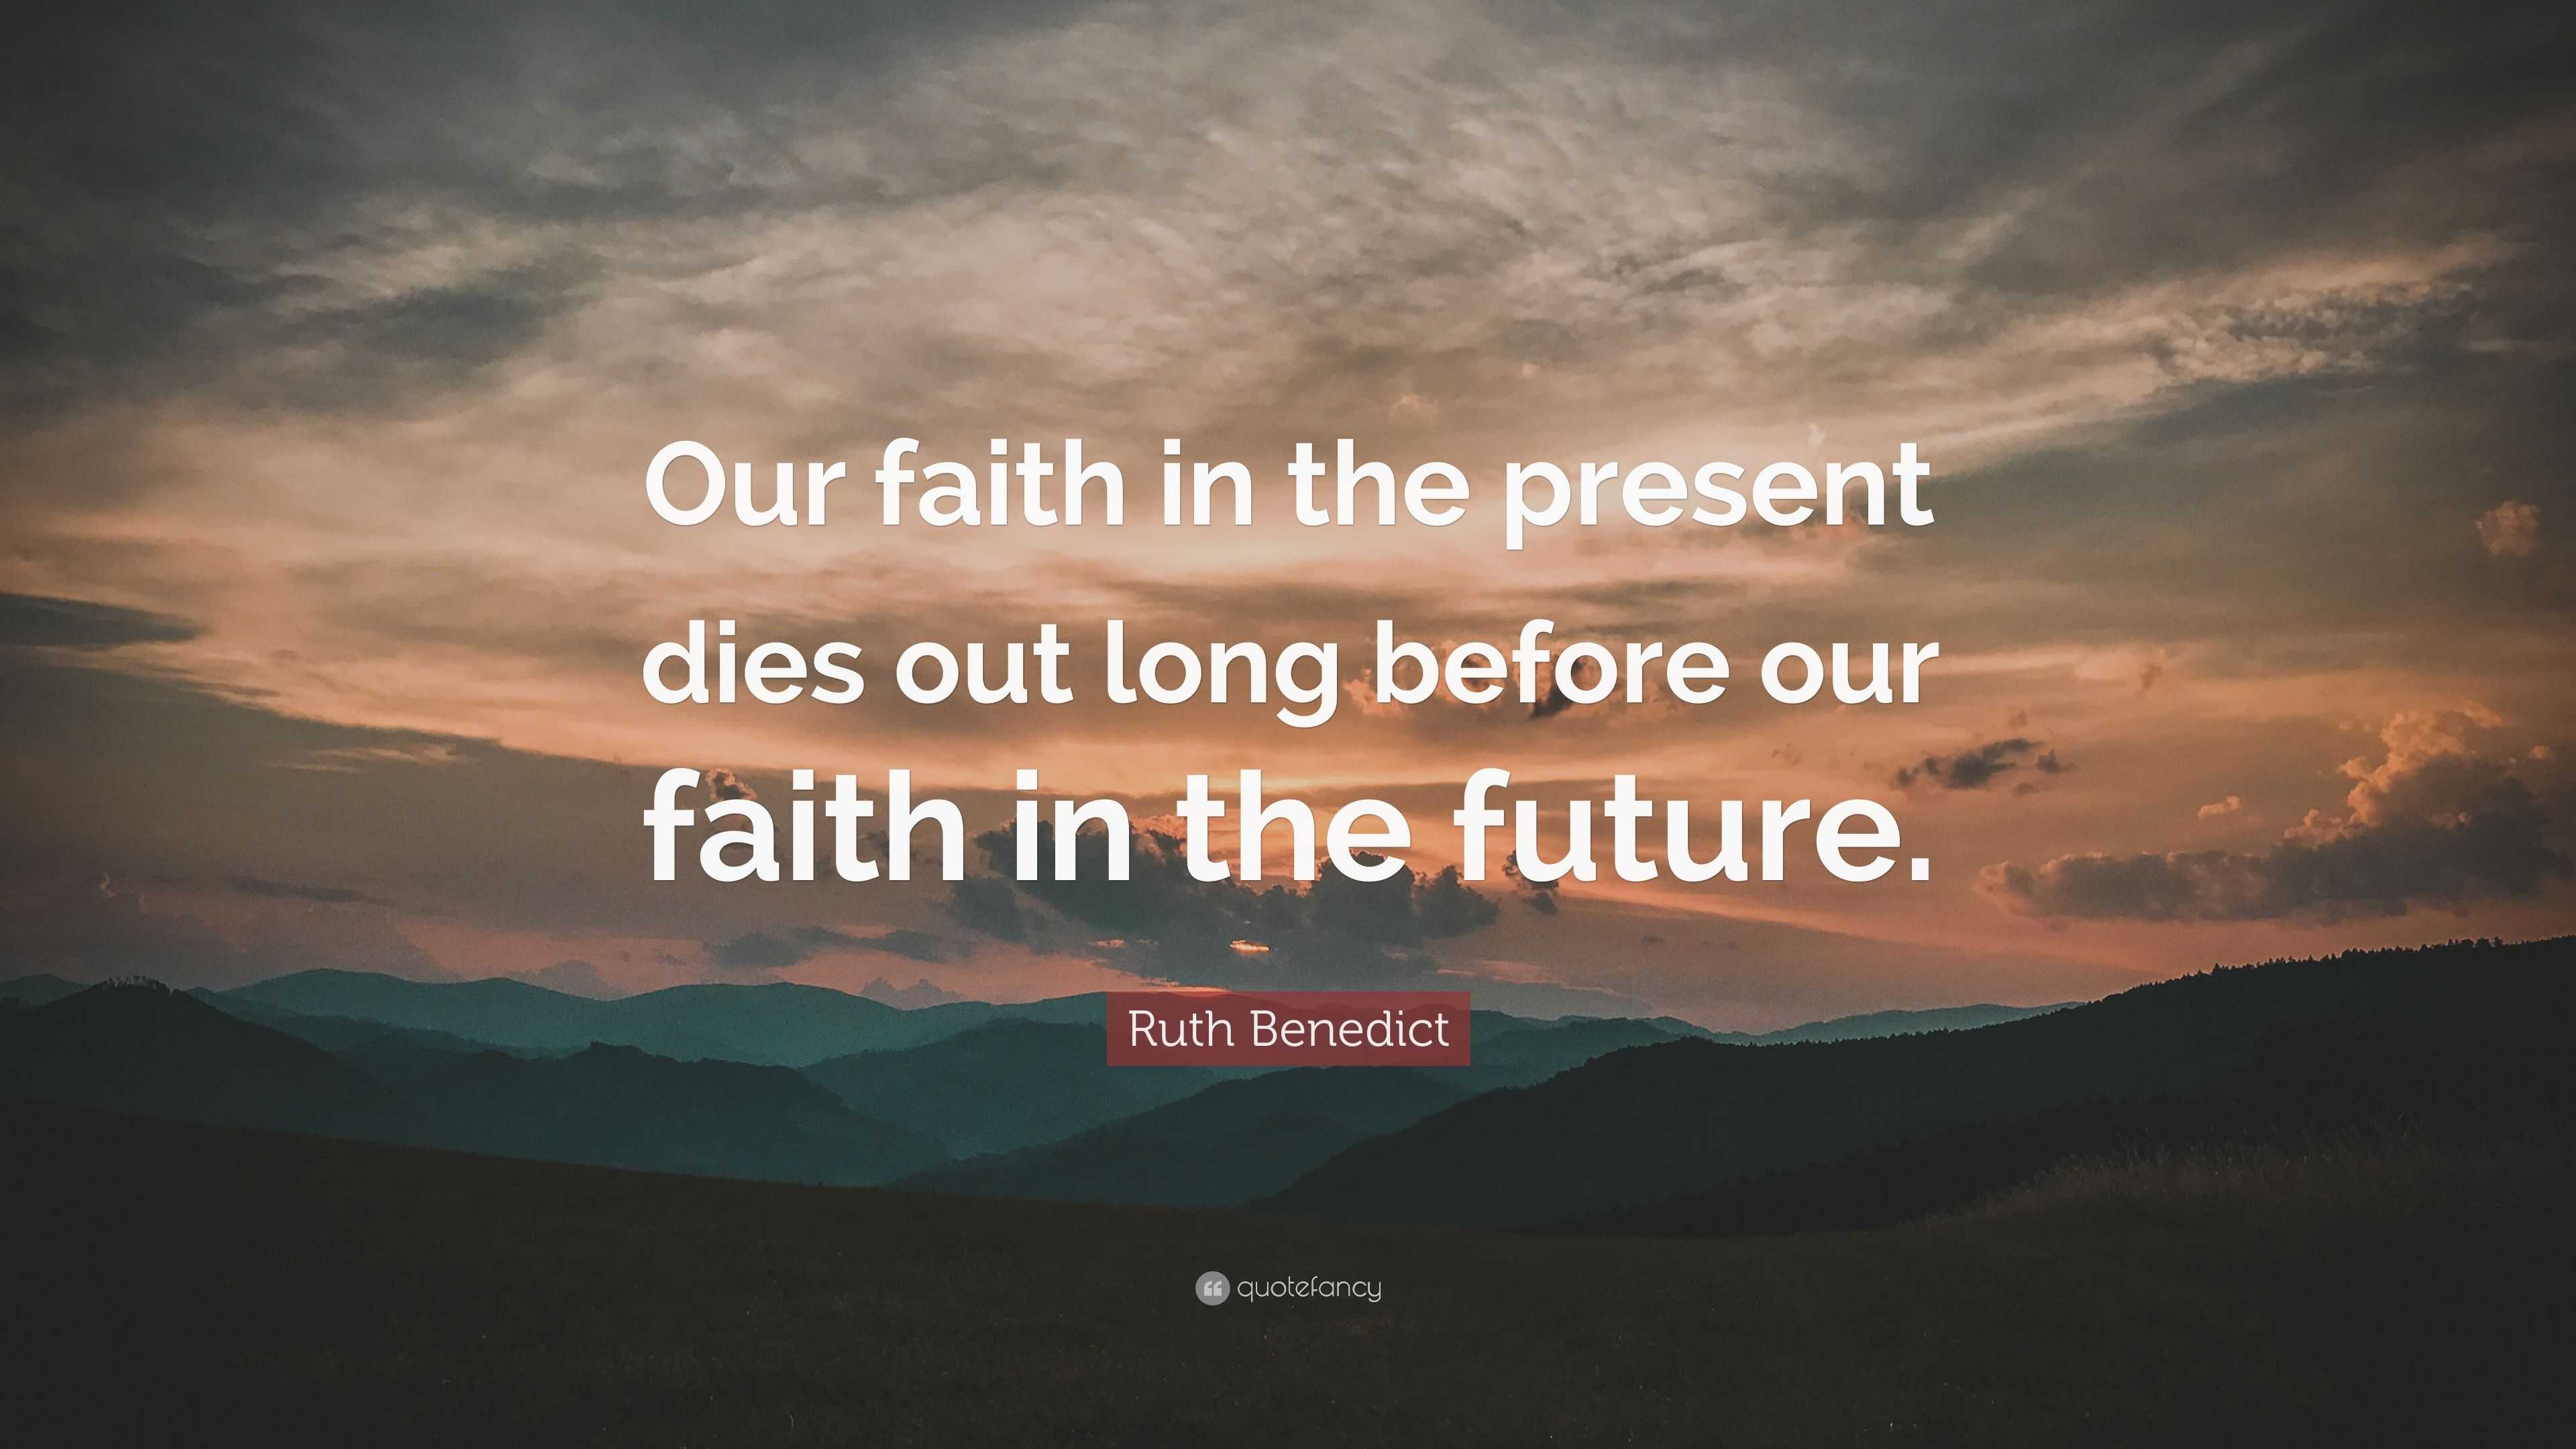 Ruth Benedict Quote: “Our faith in the present dies out long before our ...